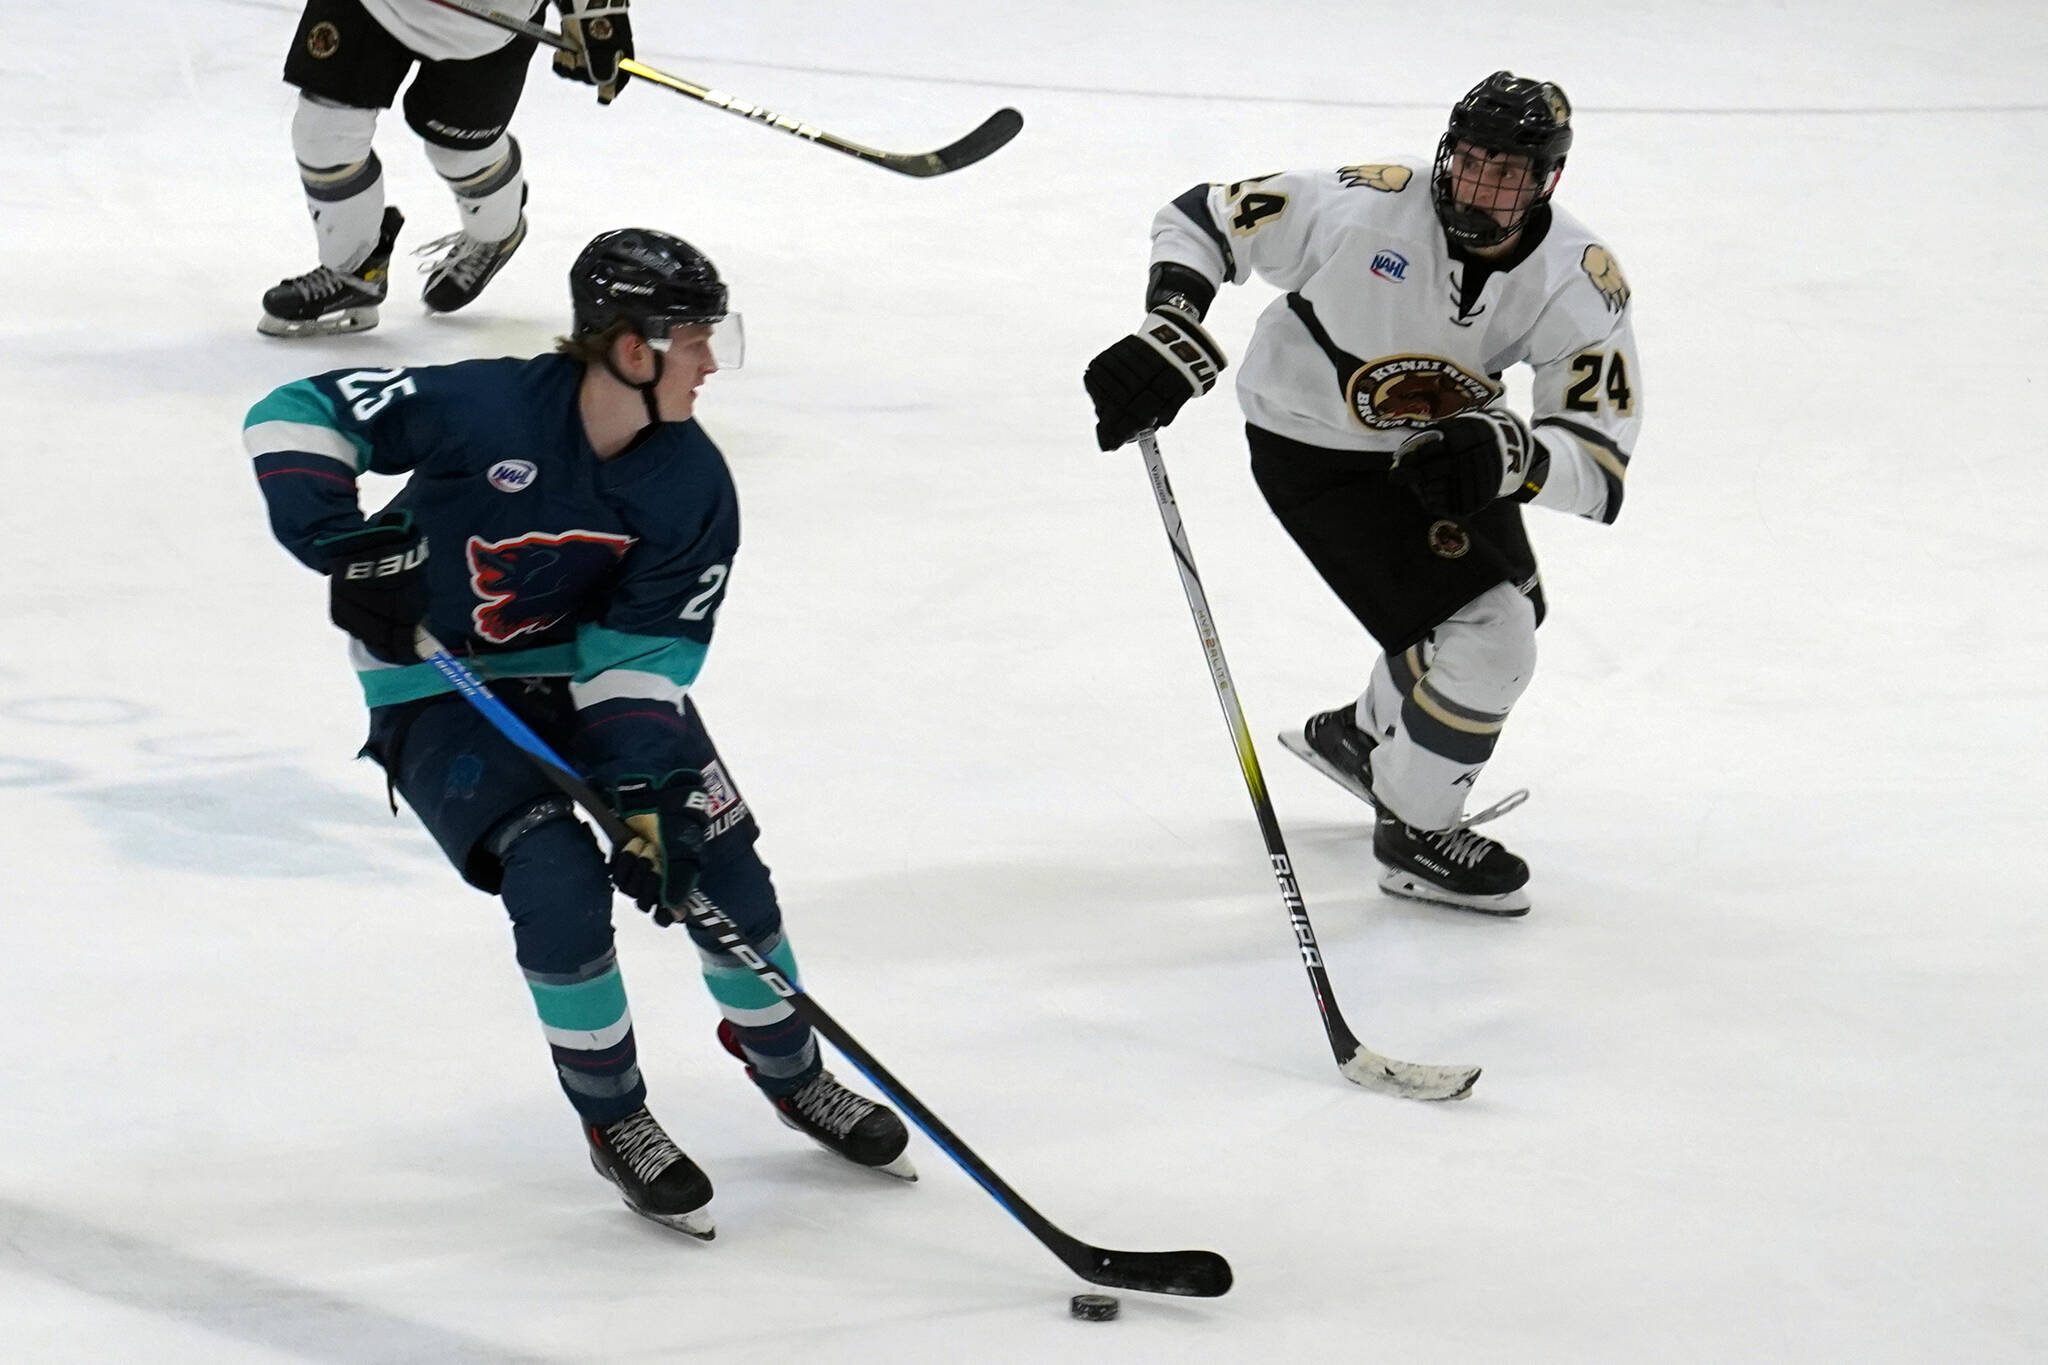 Anchorage’s Jack Darby works to keep the puck from Kenai River’s Luke Hause at the Soldotna Regional Sports Complex in Soldotna, Alaska, on Friday, Jan. 25, 2024. (Jake Dye/Peninsula Clarion)